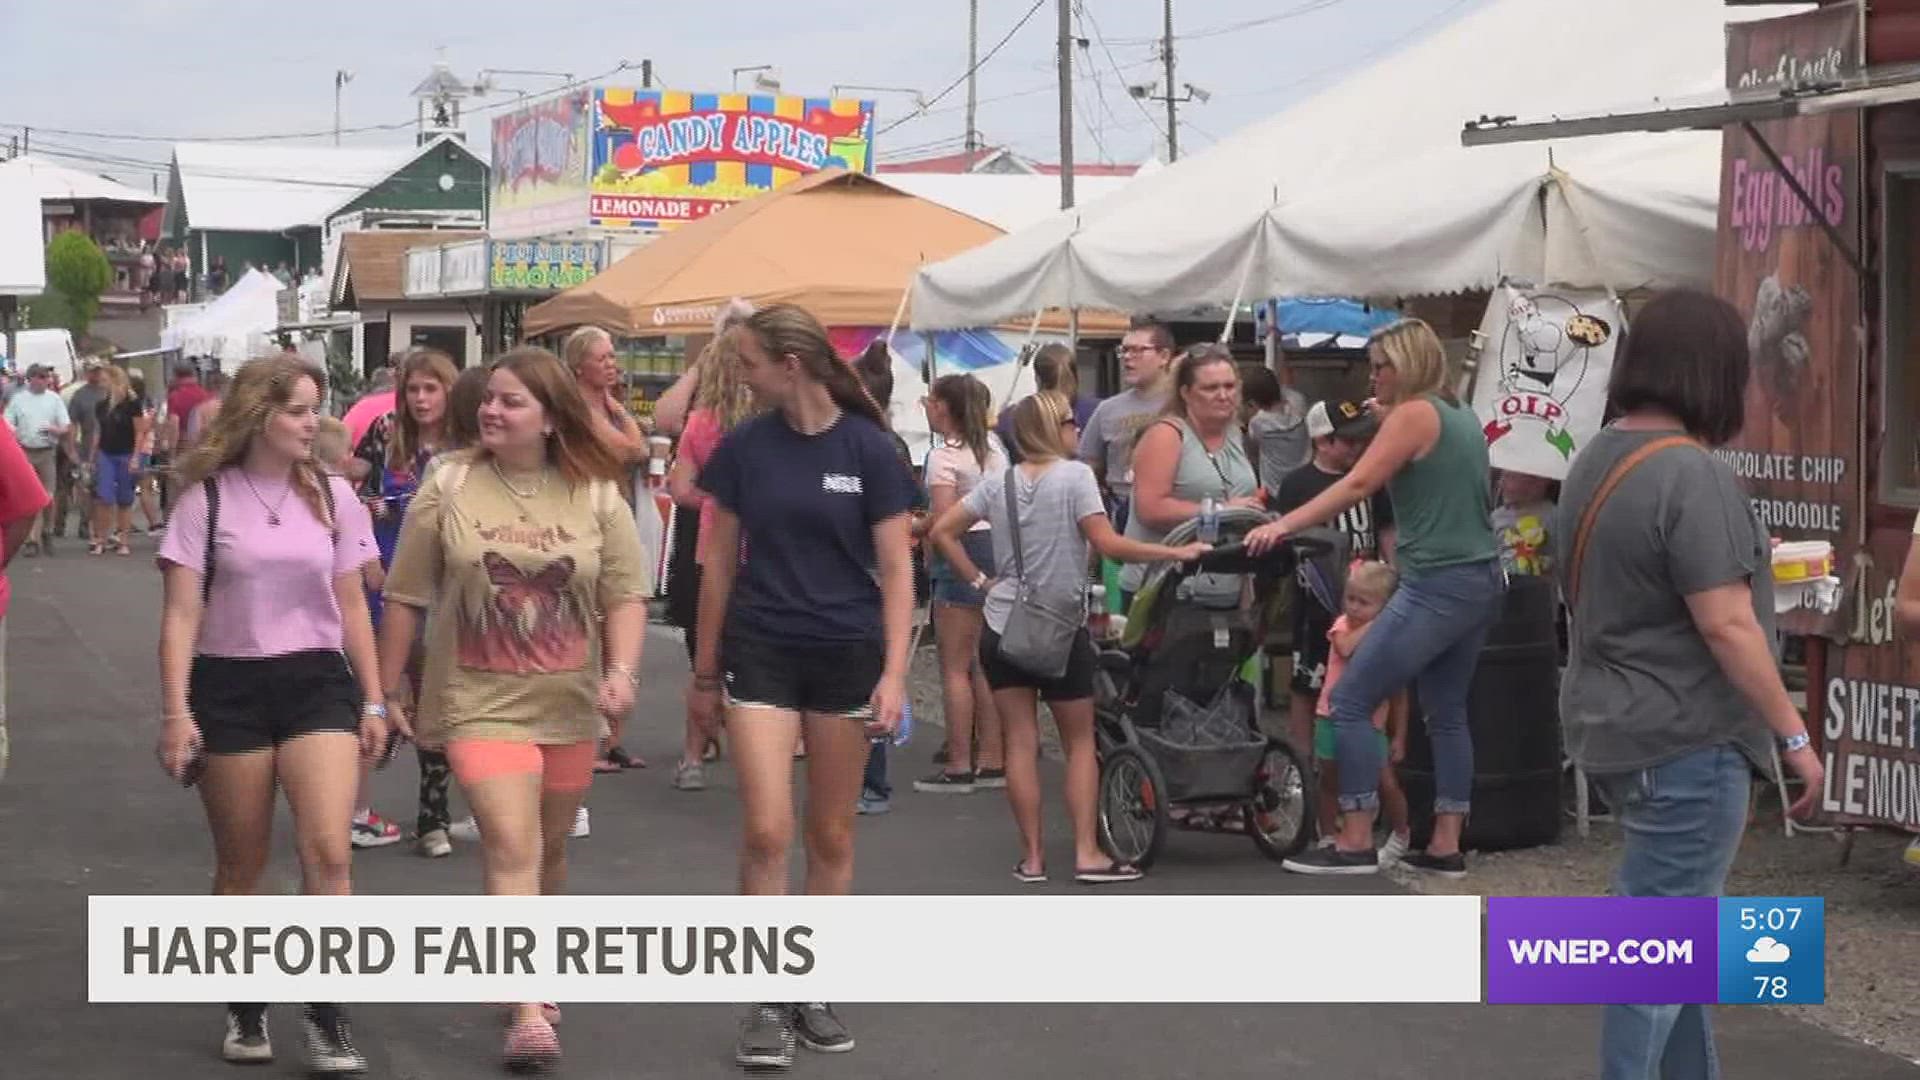 Monday marked the first day of the Harford Fair in Susquehanna County after a year off last summer.